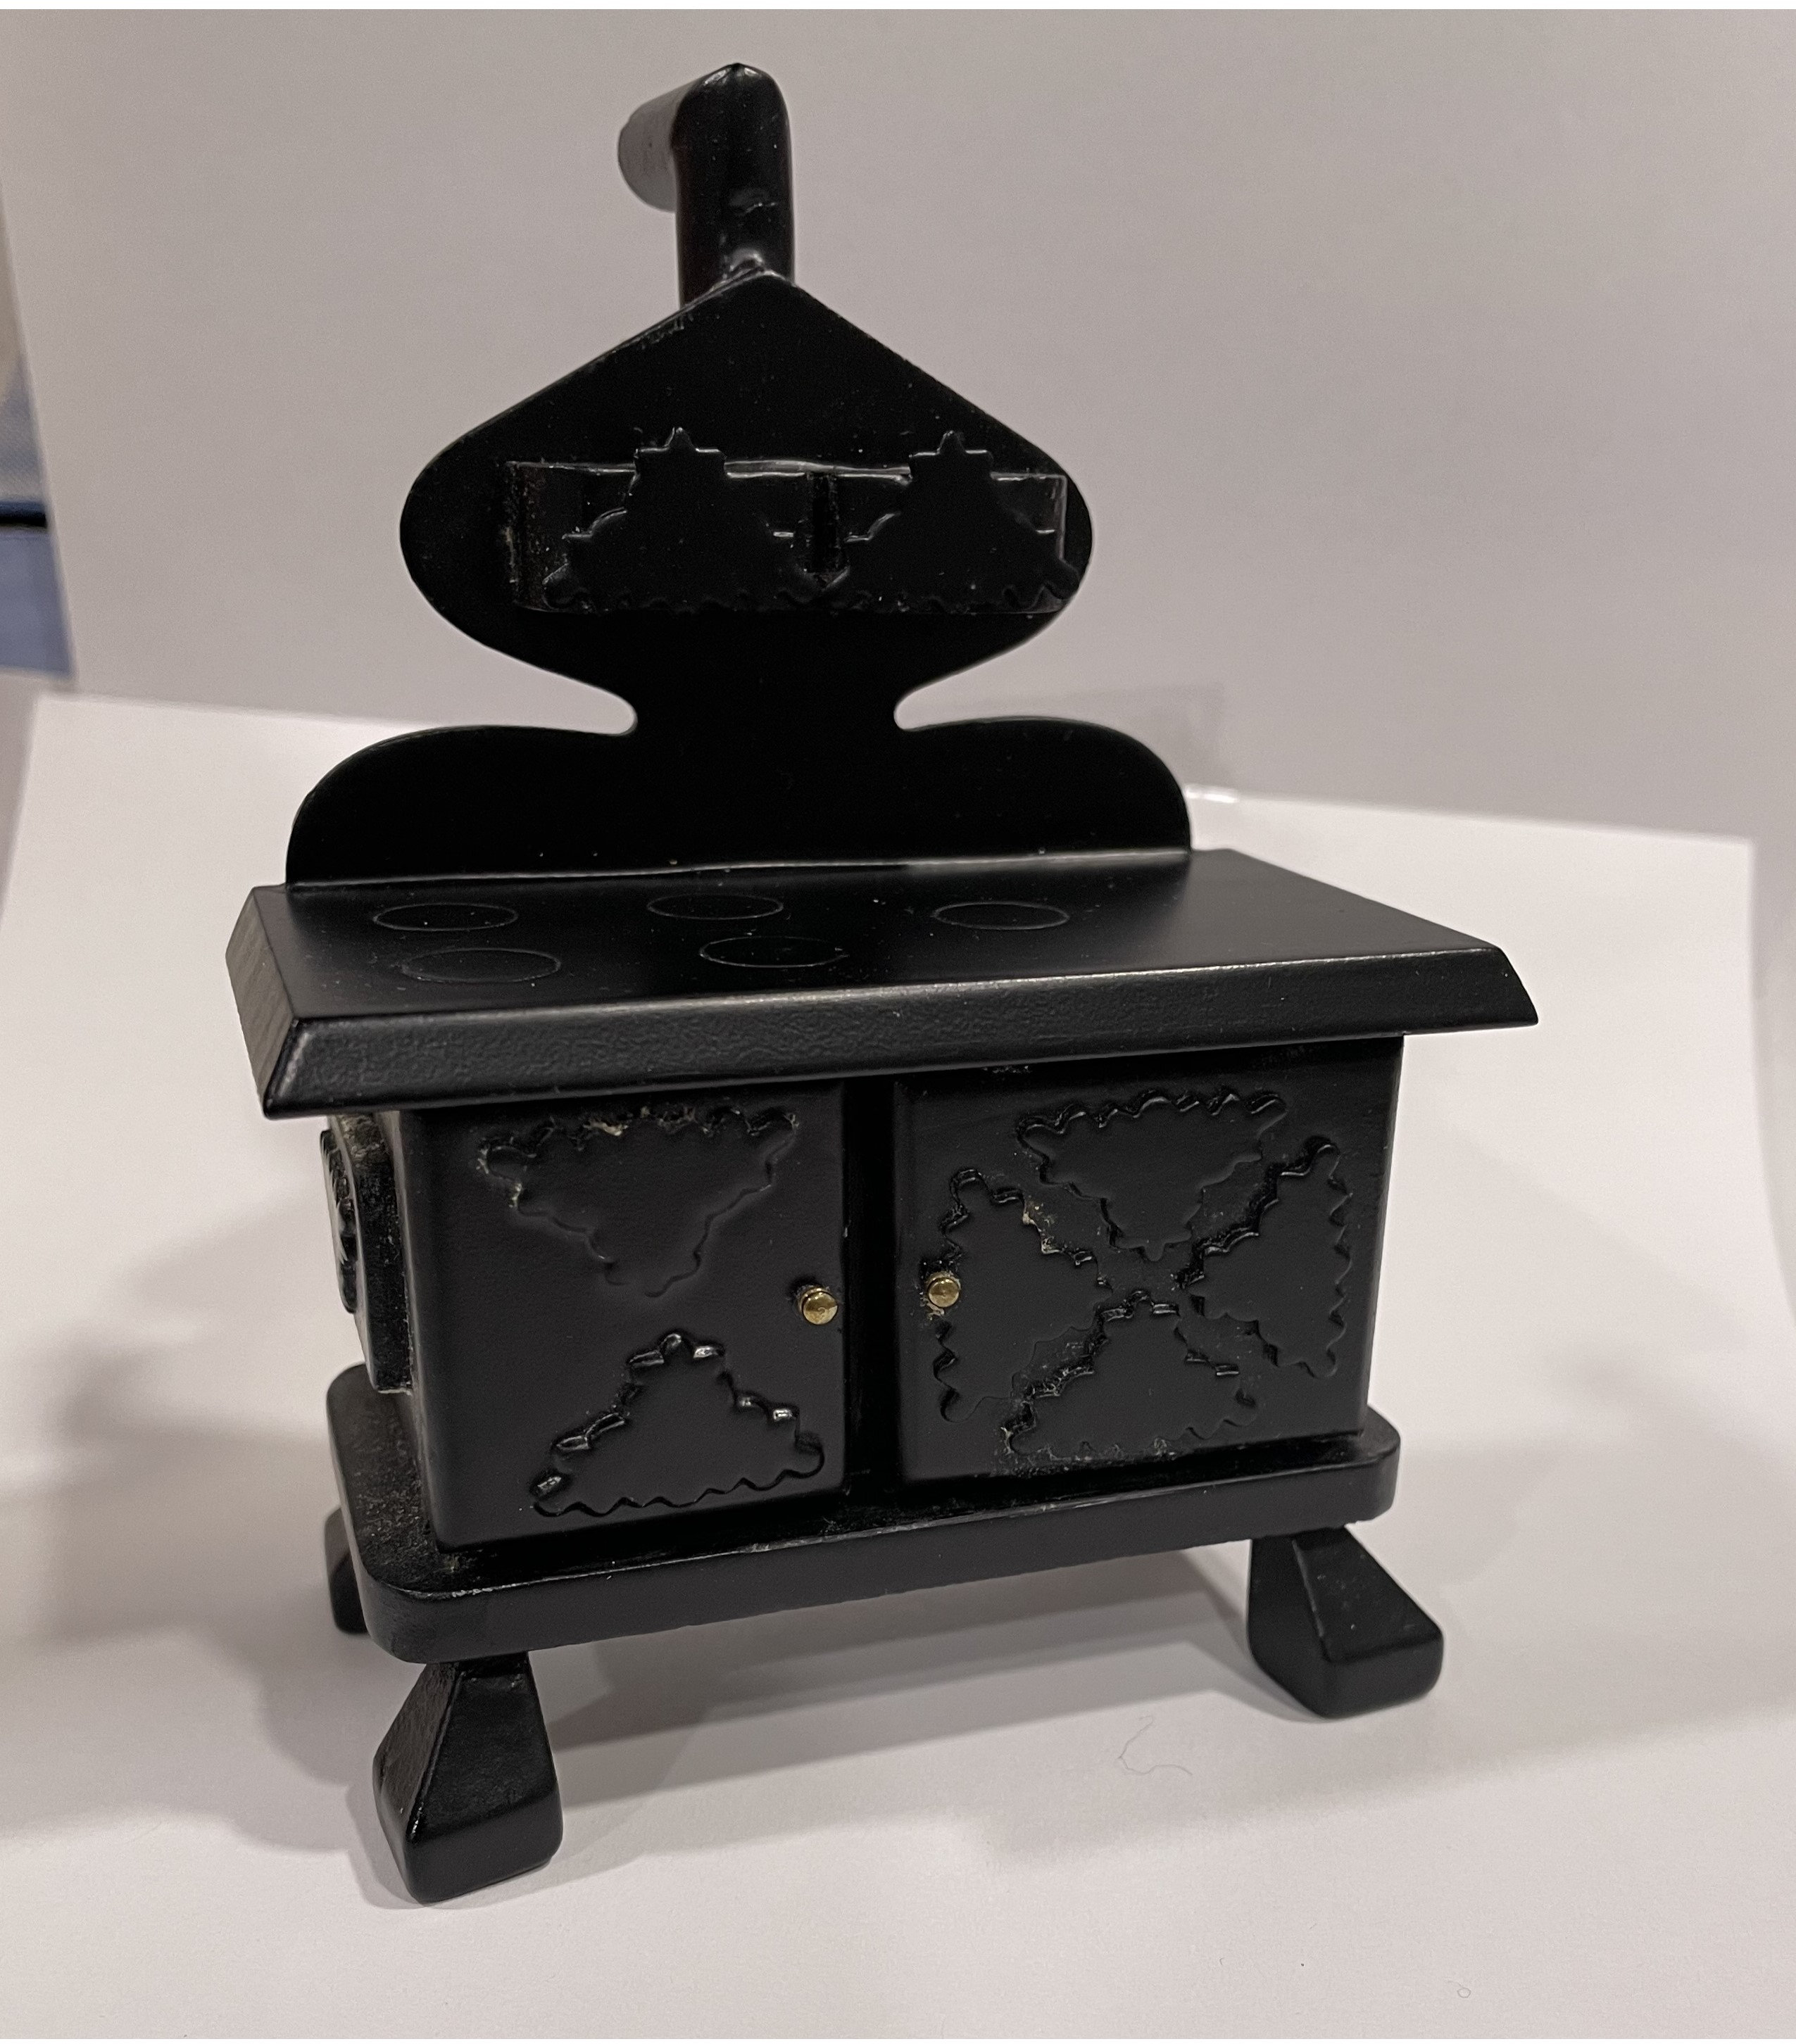 Miniature Old Fashioned Wood Stove for Dollhouses [AZT T5931]